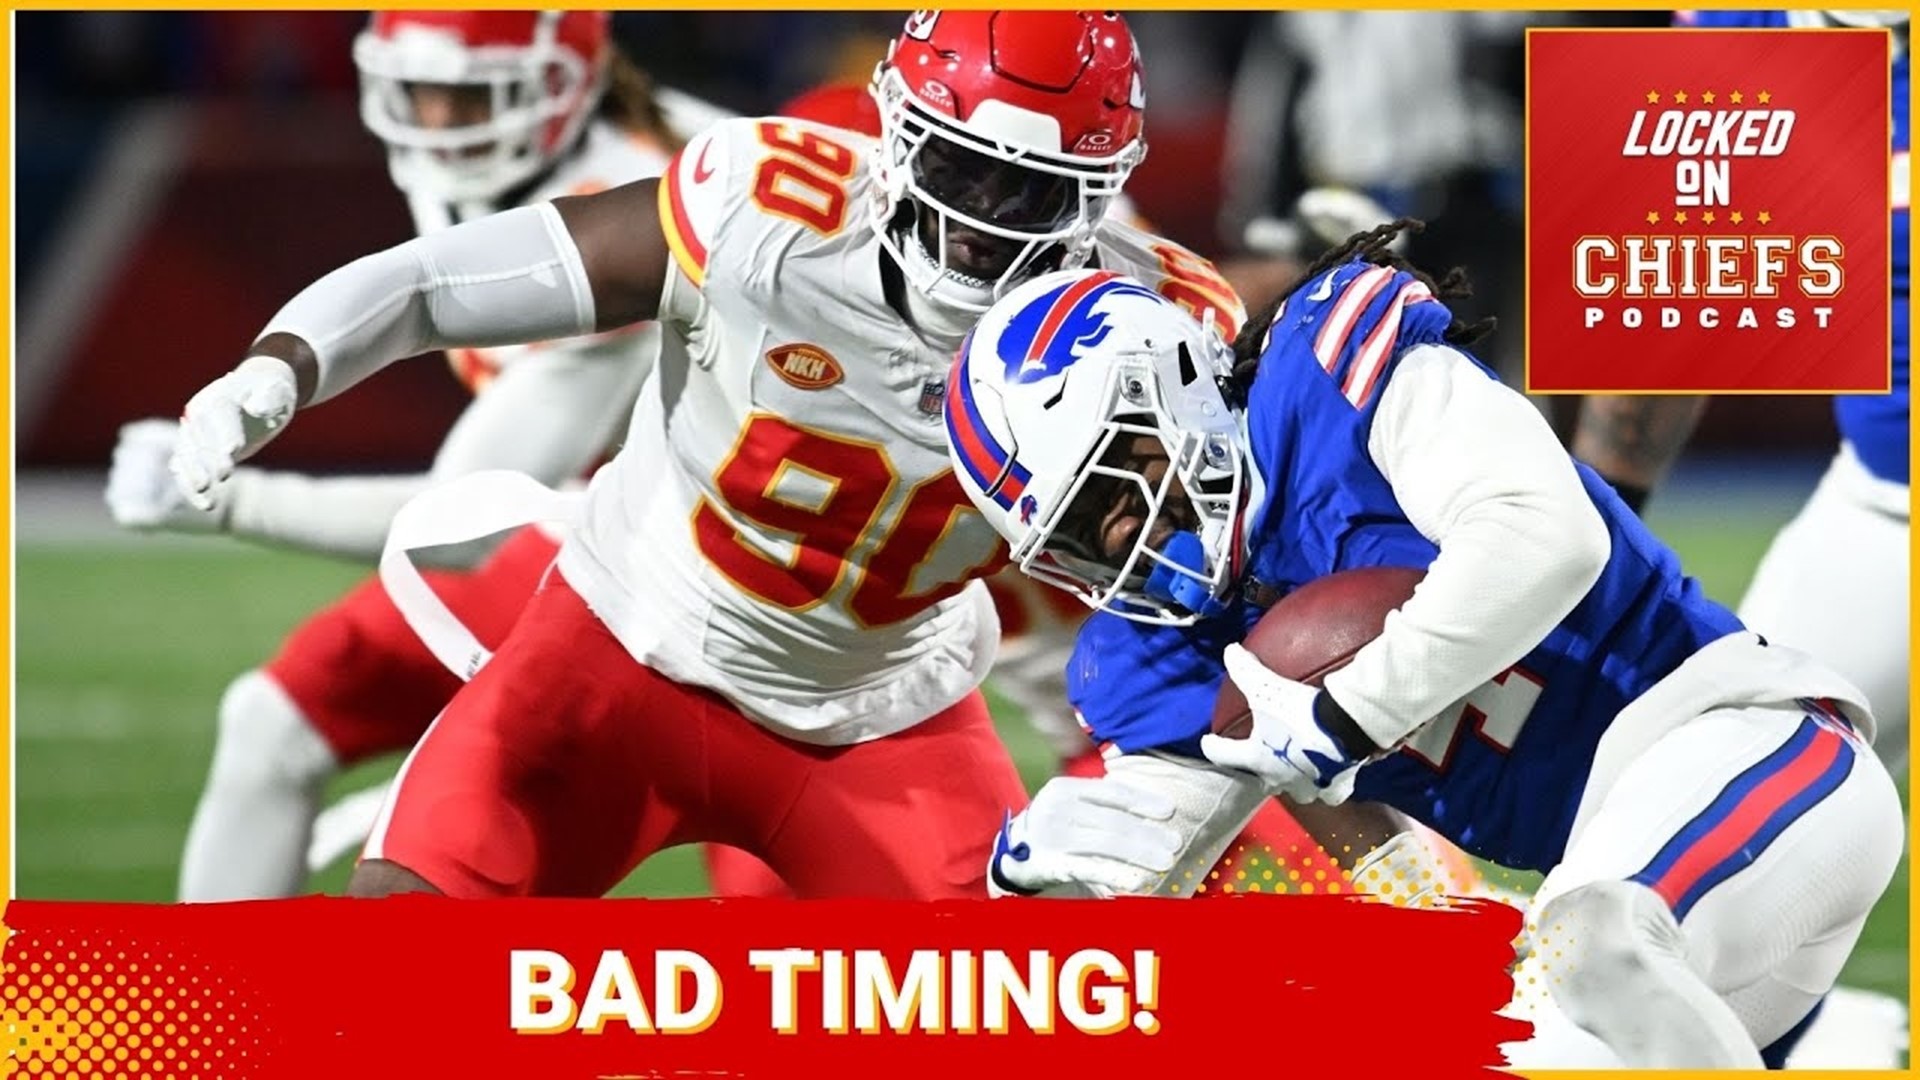 The Kansas City Chiefs will be without Charles Omenihu in the Super Bowl, but they will win as an underdog nonetheless.